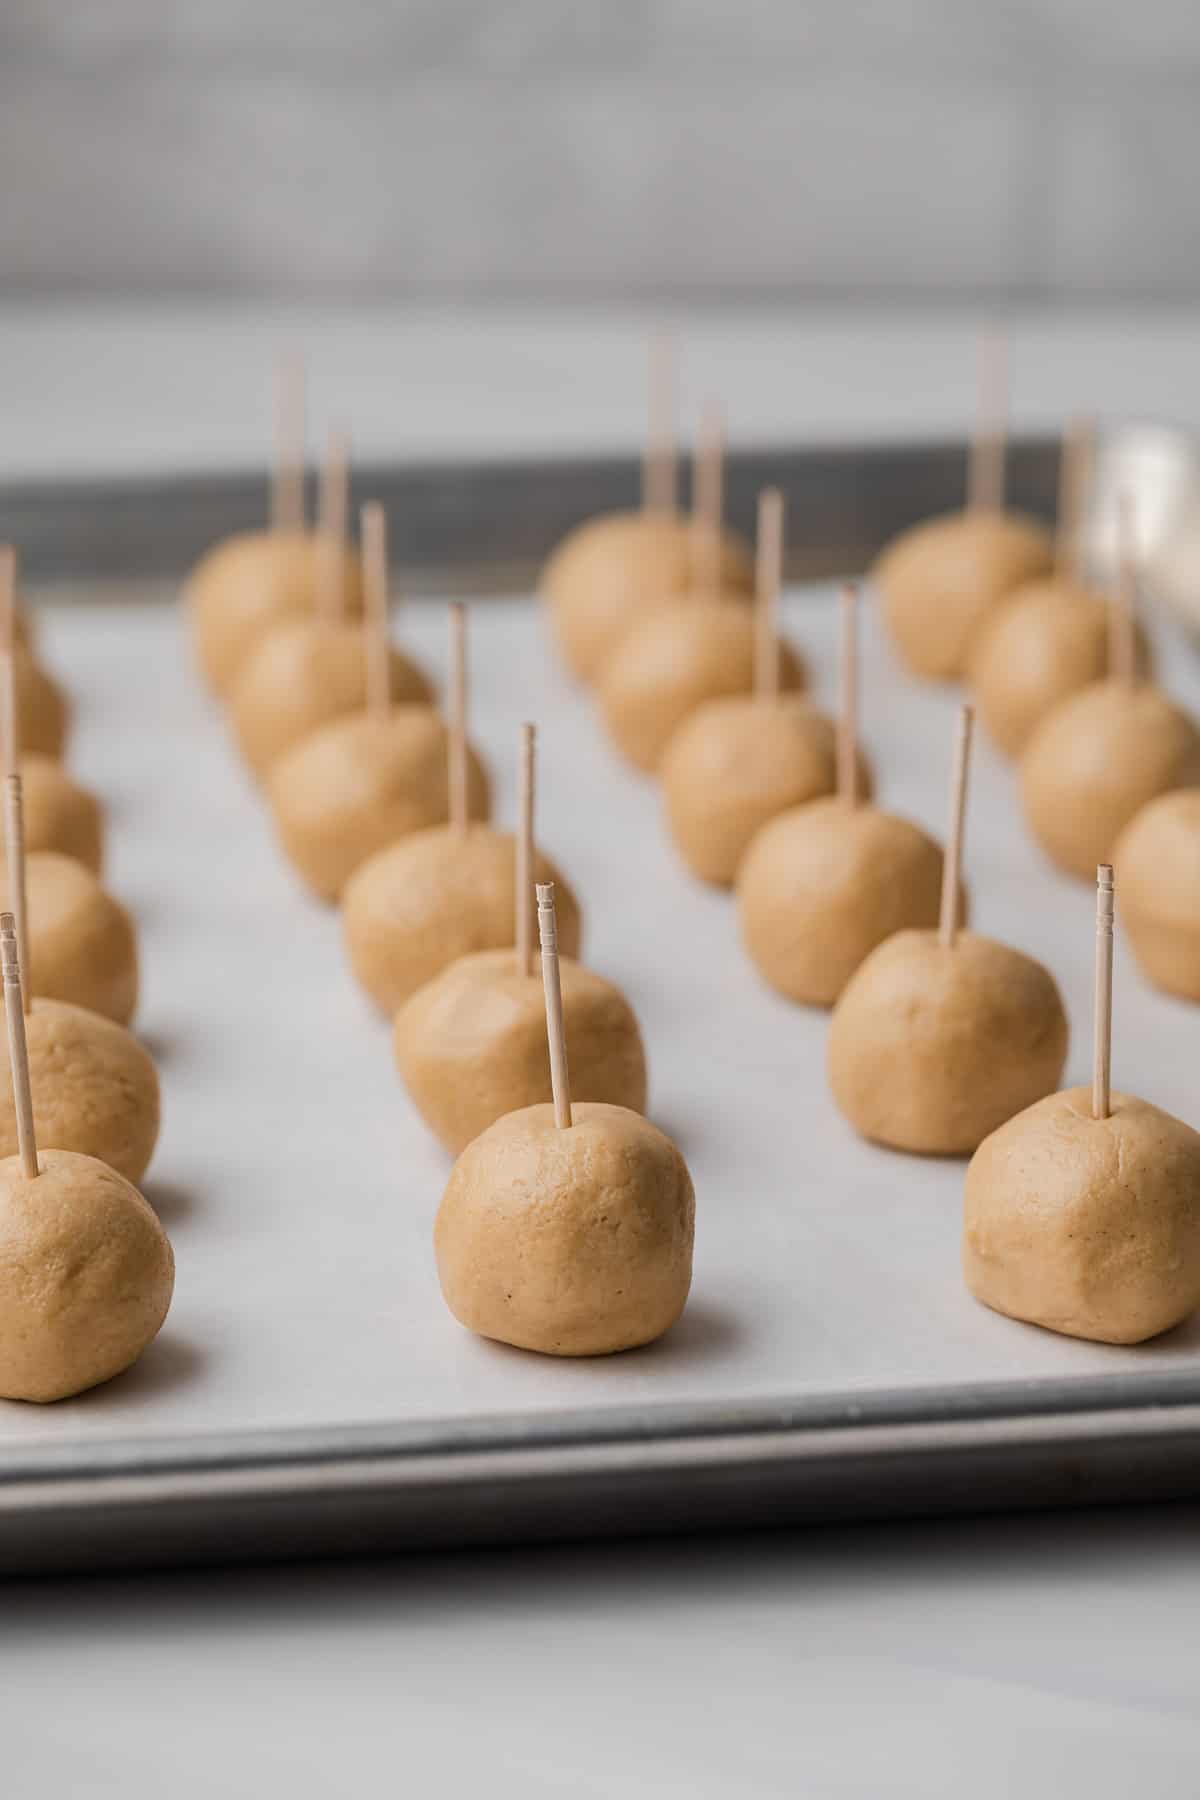 peanut butter balls with toothpicks sticking out of the top lined neatly on a baking sheet